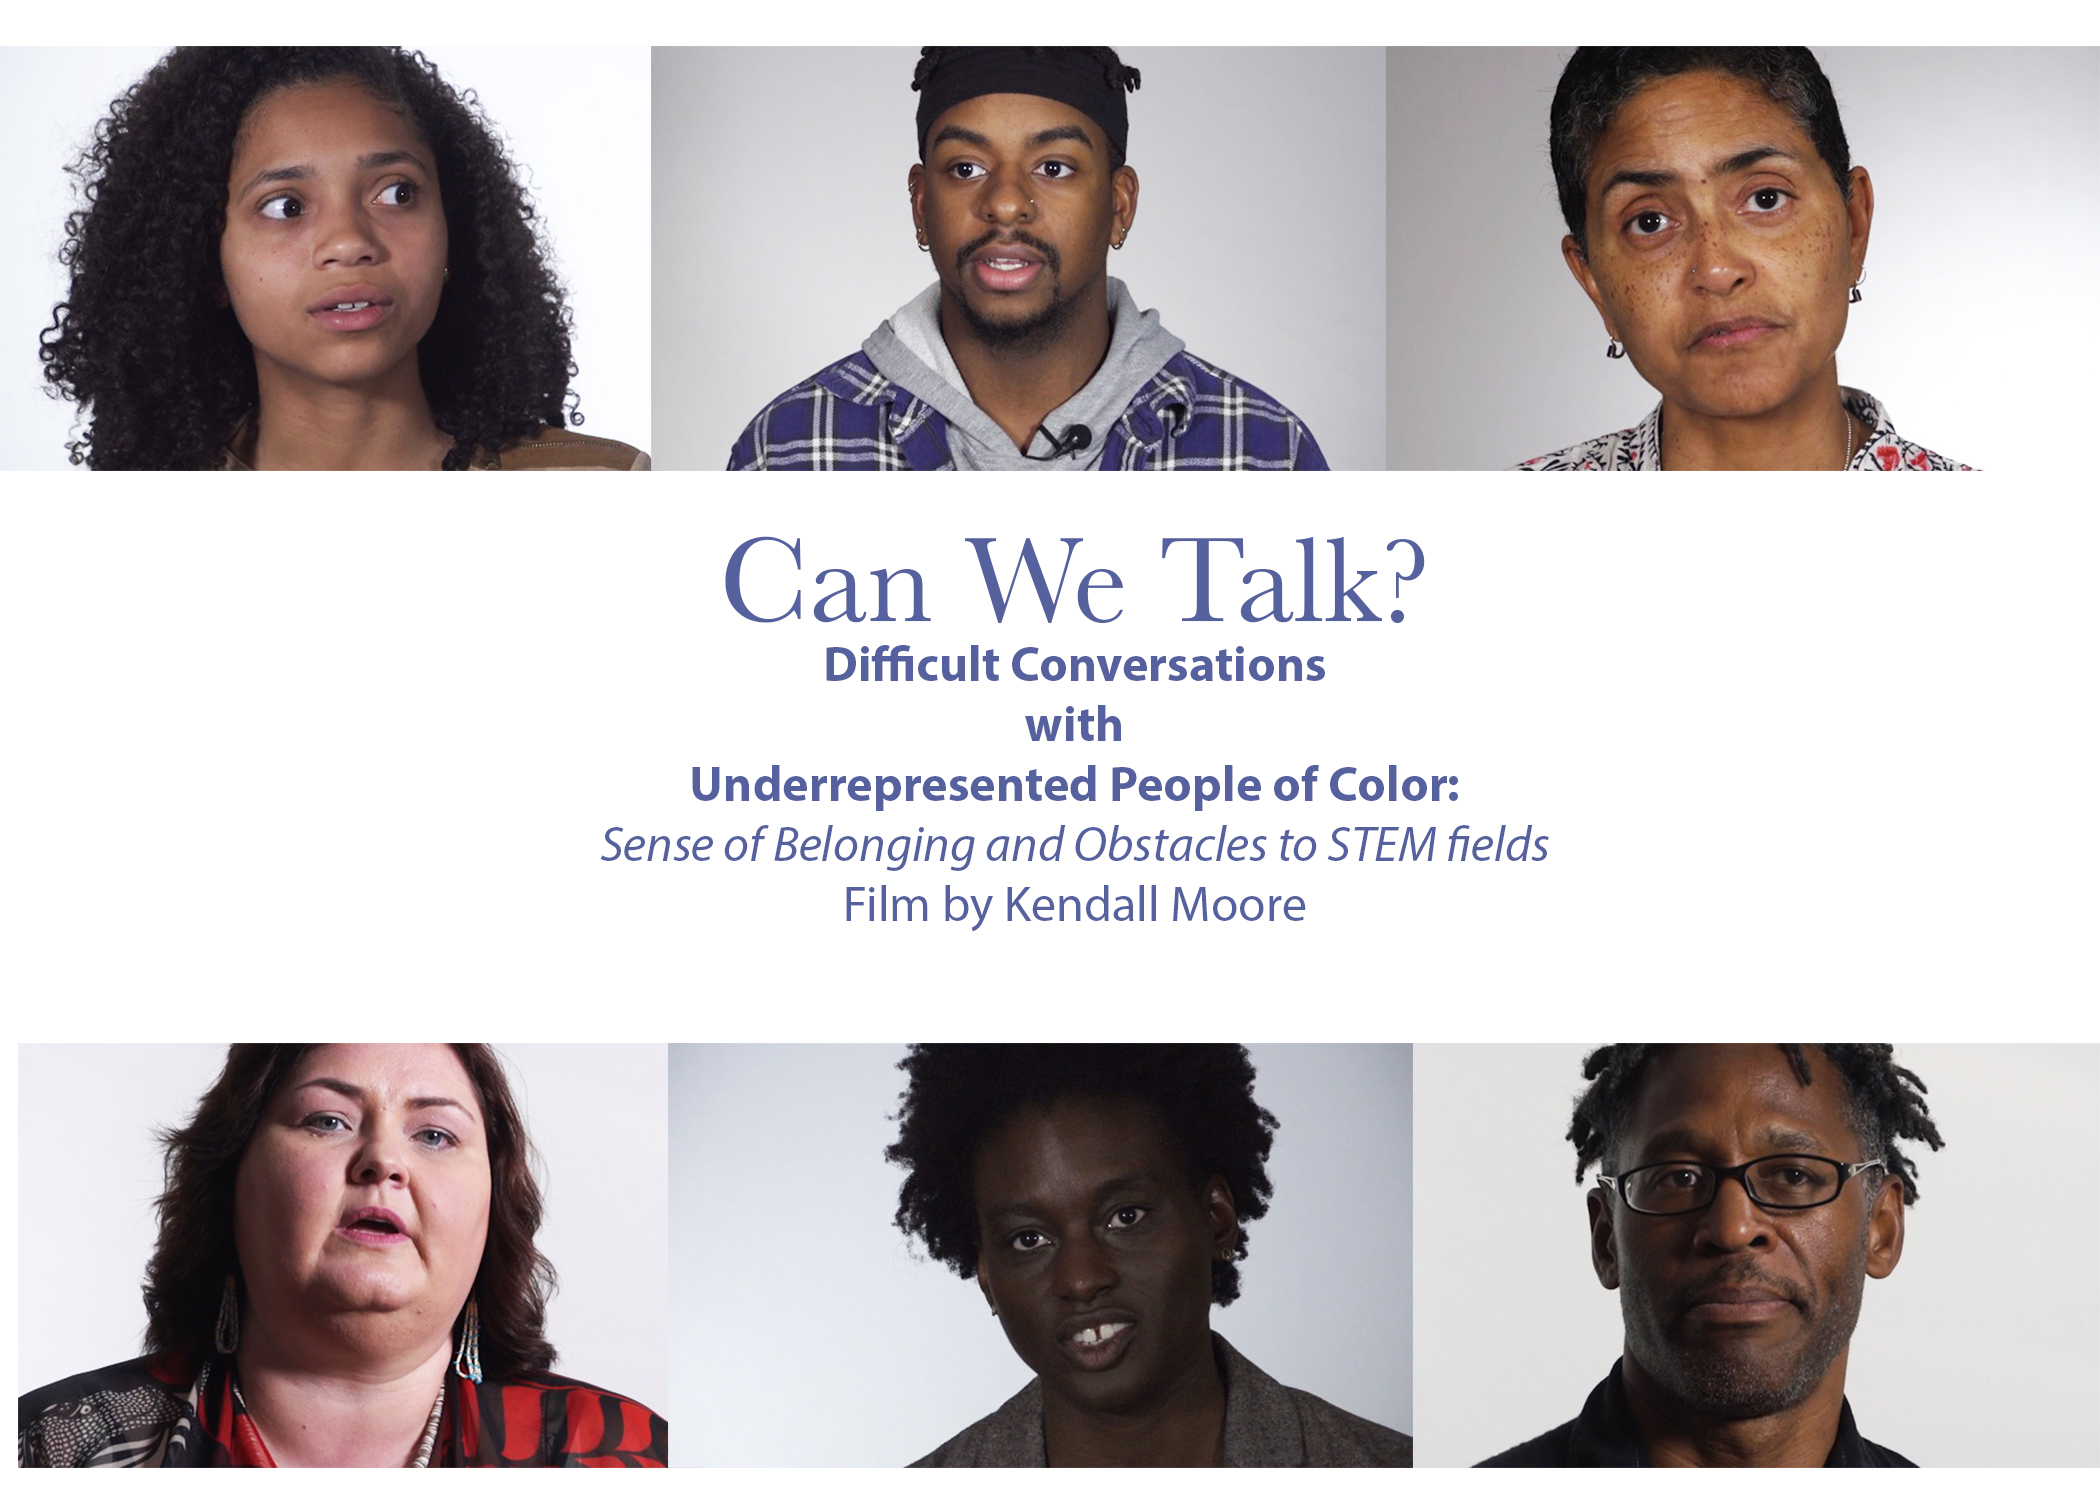 poster for film: “Can We Talk? Difficult Conversations with Underrepresented People of Color: Sense of Belonging and Obstacles to STEM Fields”